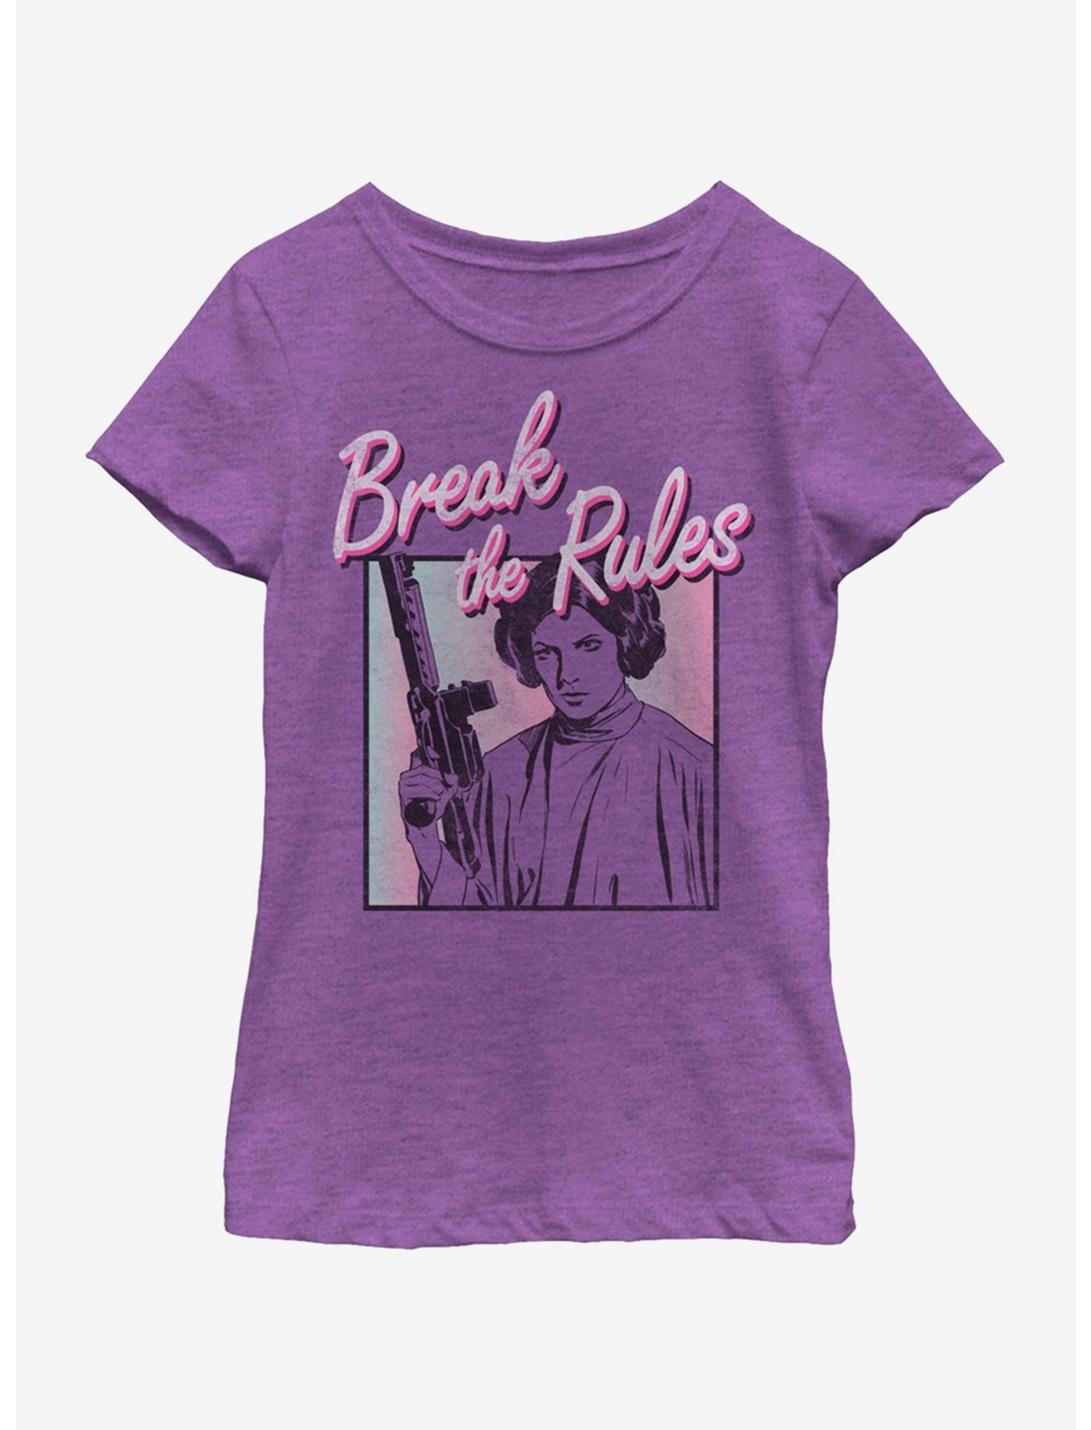 Star Wars Break The Rules Youth Girls T-Shirt, PURPLE BERRY, hi-res